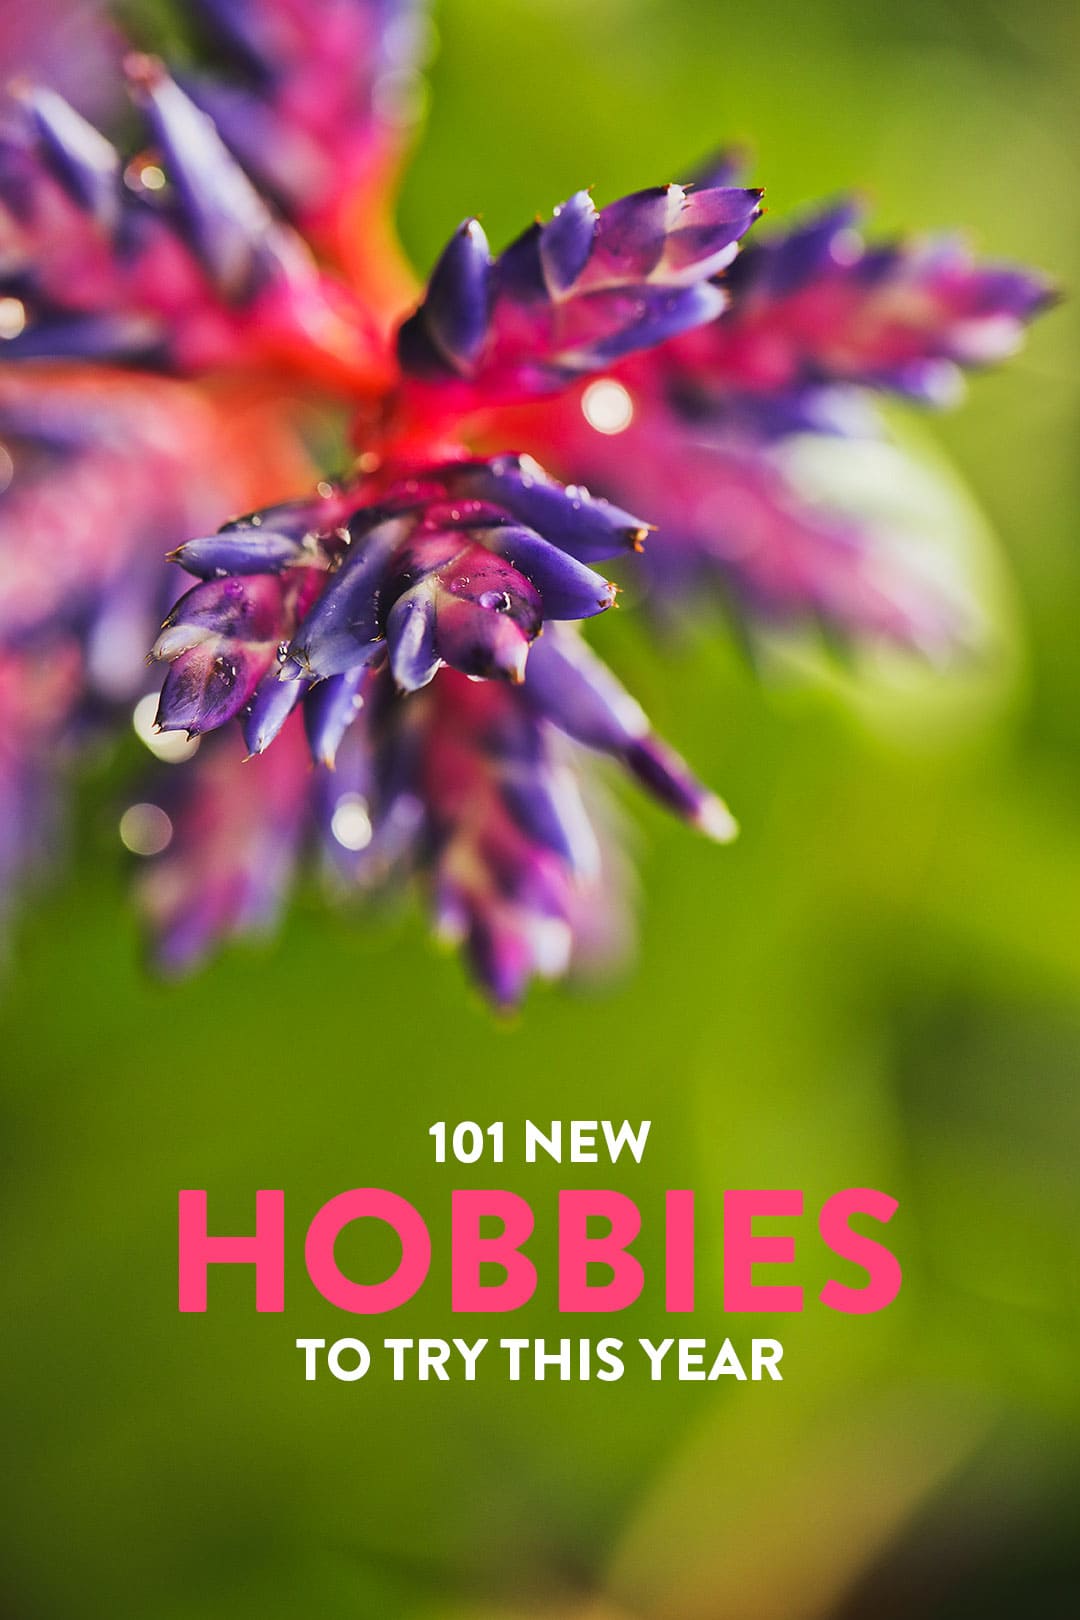 101 New Hobbies to Try in the New Year - Listed by Types of Hobbies